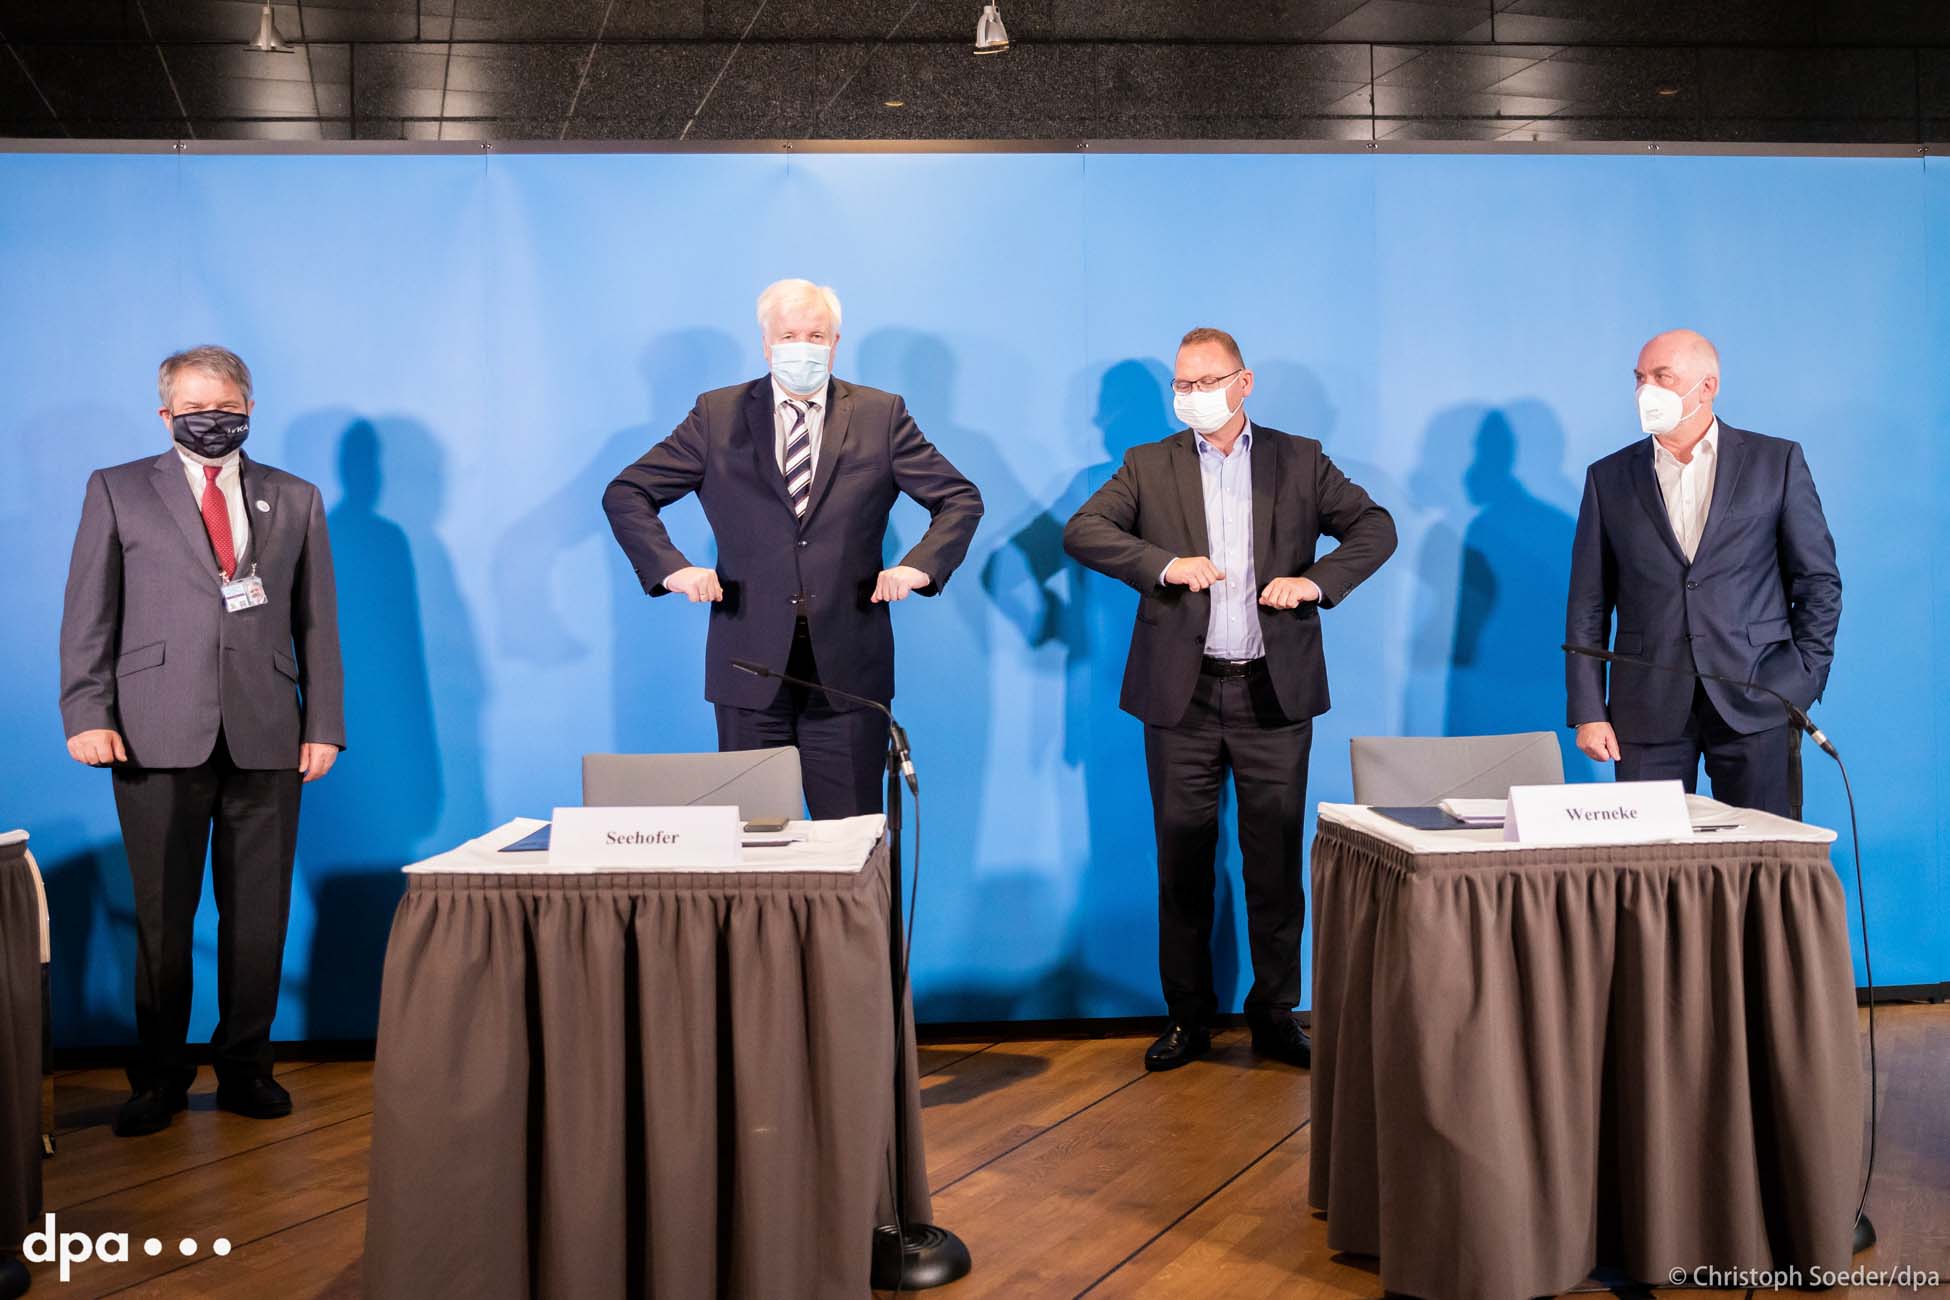 Negotiations for wages of civil service employees in Potsdam: Mädge, Seehofer, Werneke, Silberbach